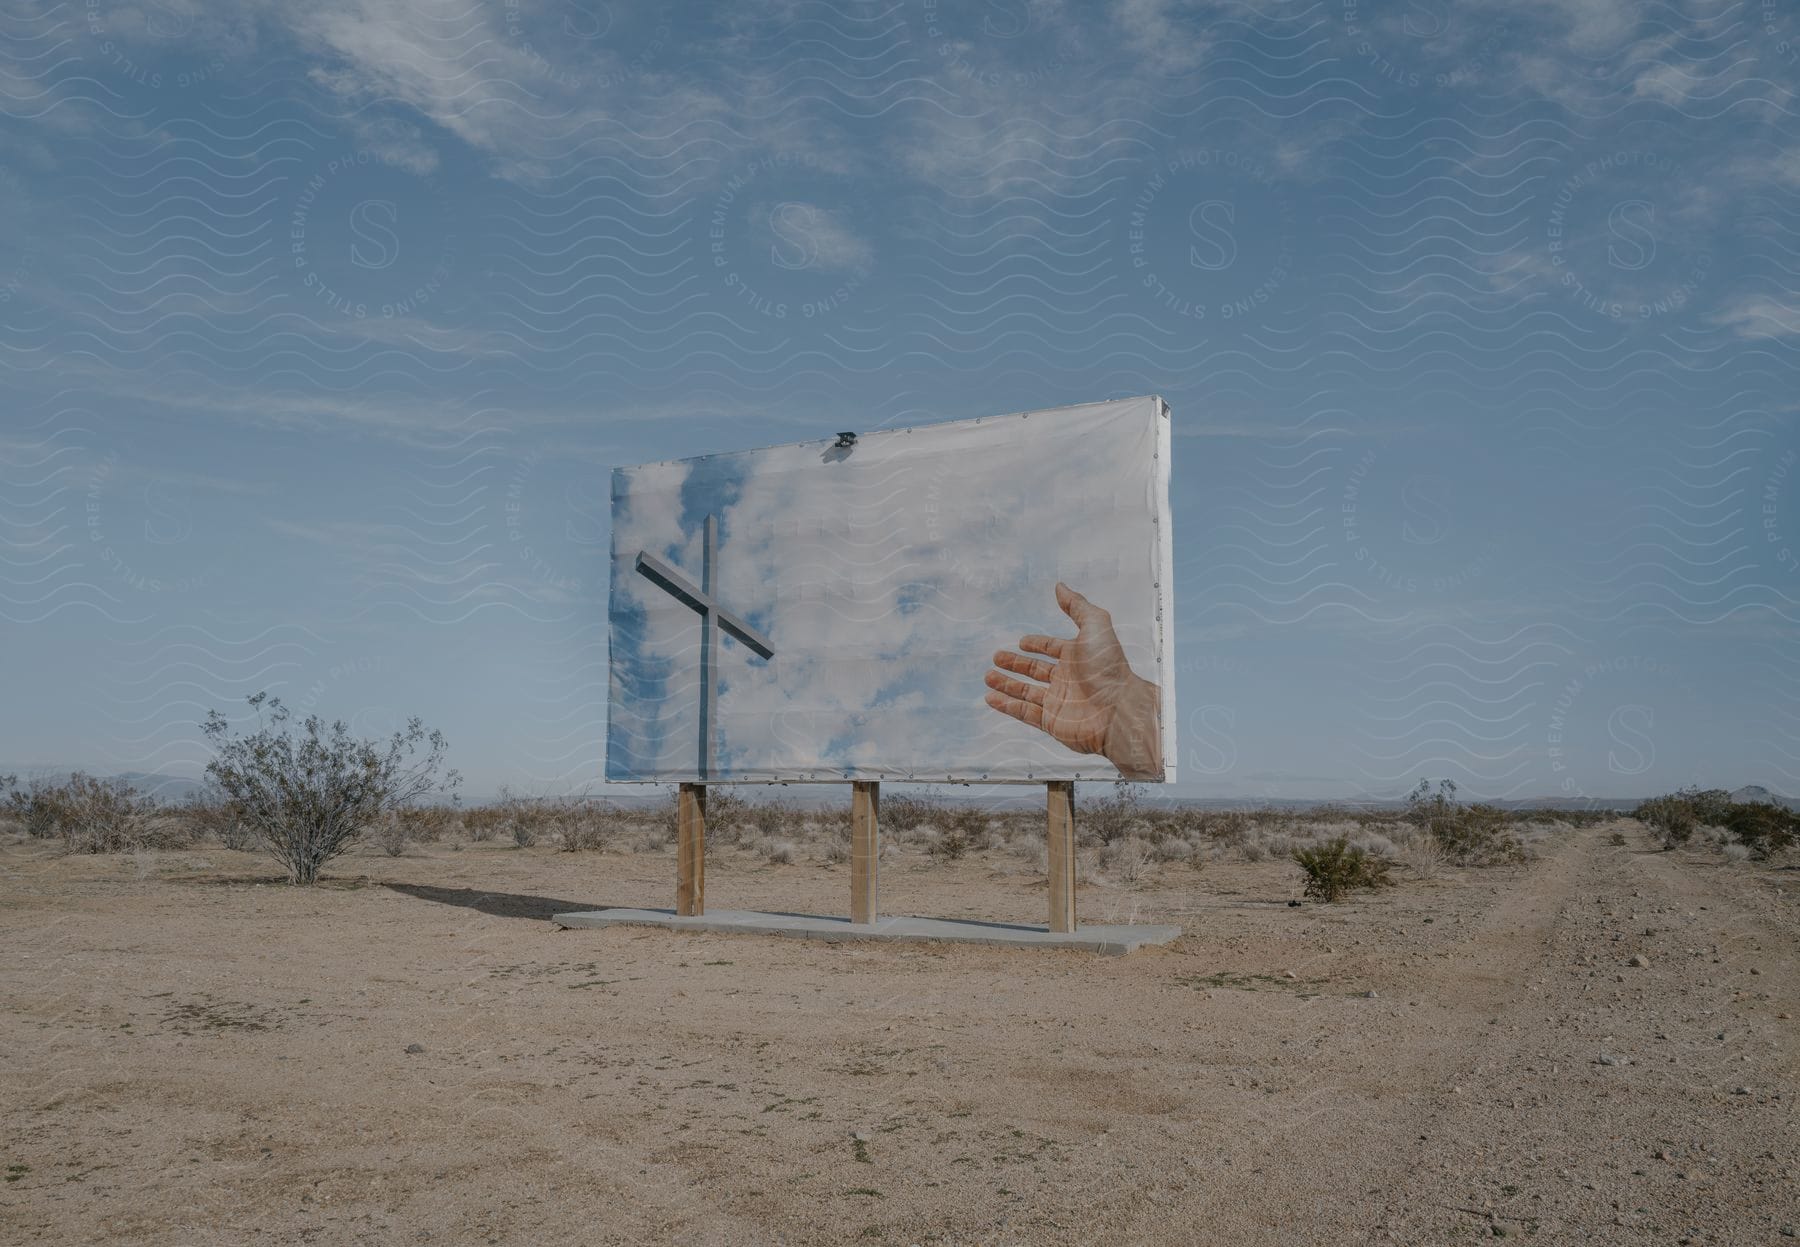 A billboard in the desert depicts a hand reaching out to a crucifix against a blue and white sky